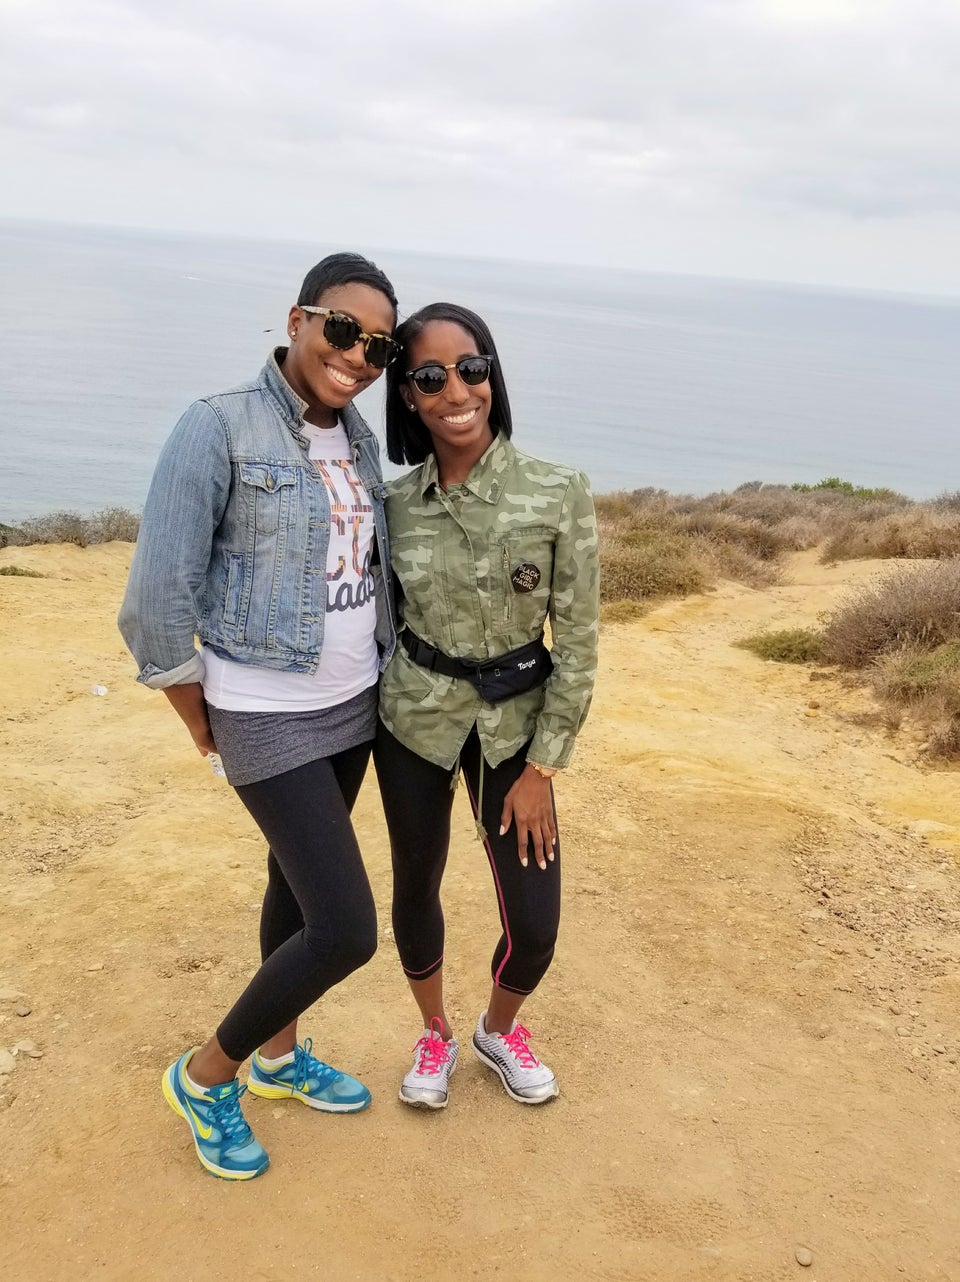 Taking This Scenic California Road Trip With My Sister Was Exactly The Self Care Bonding We Needed